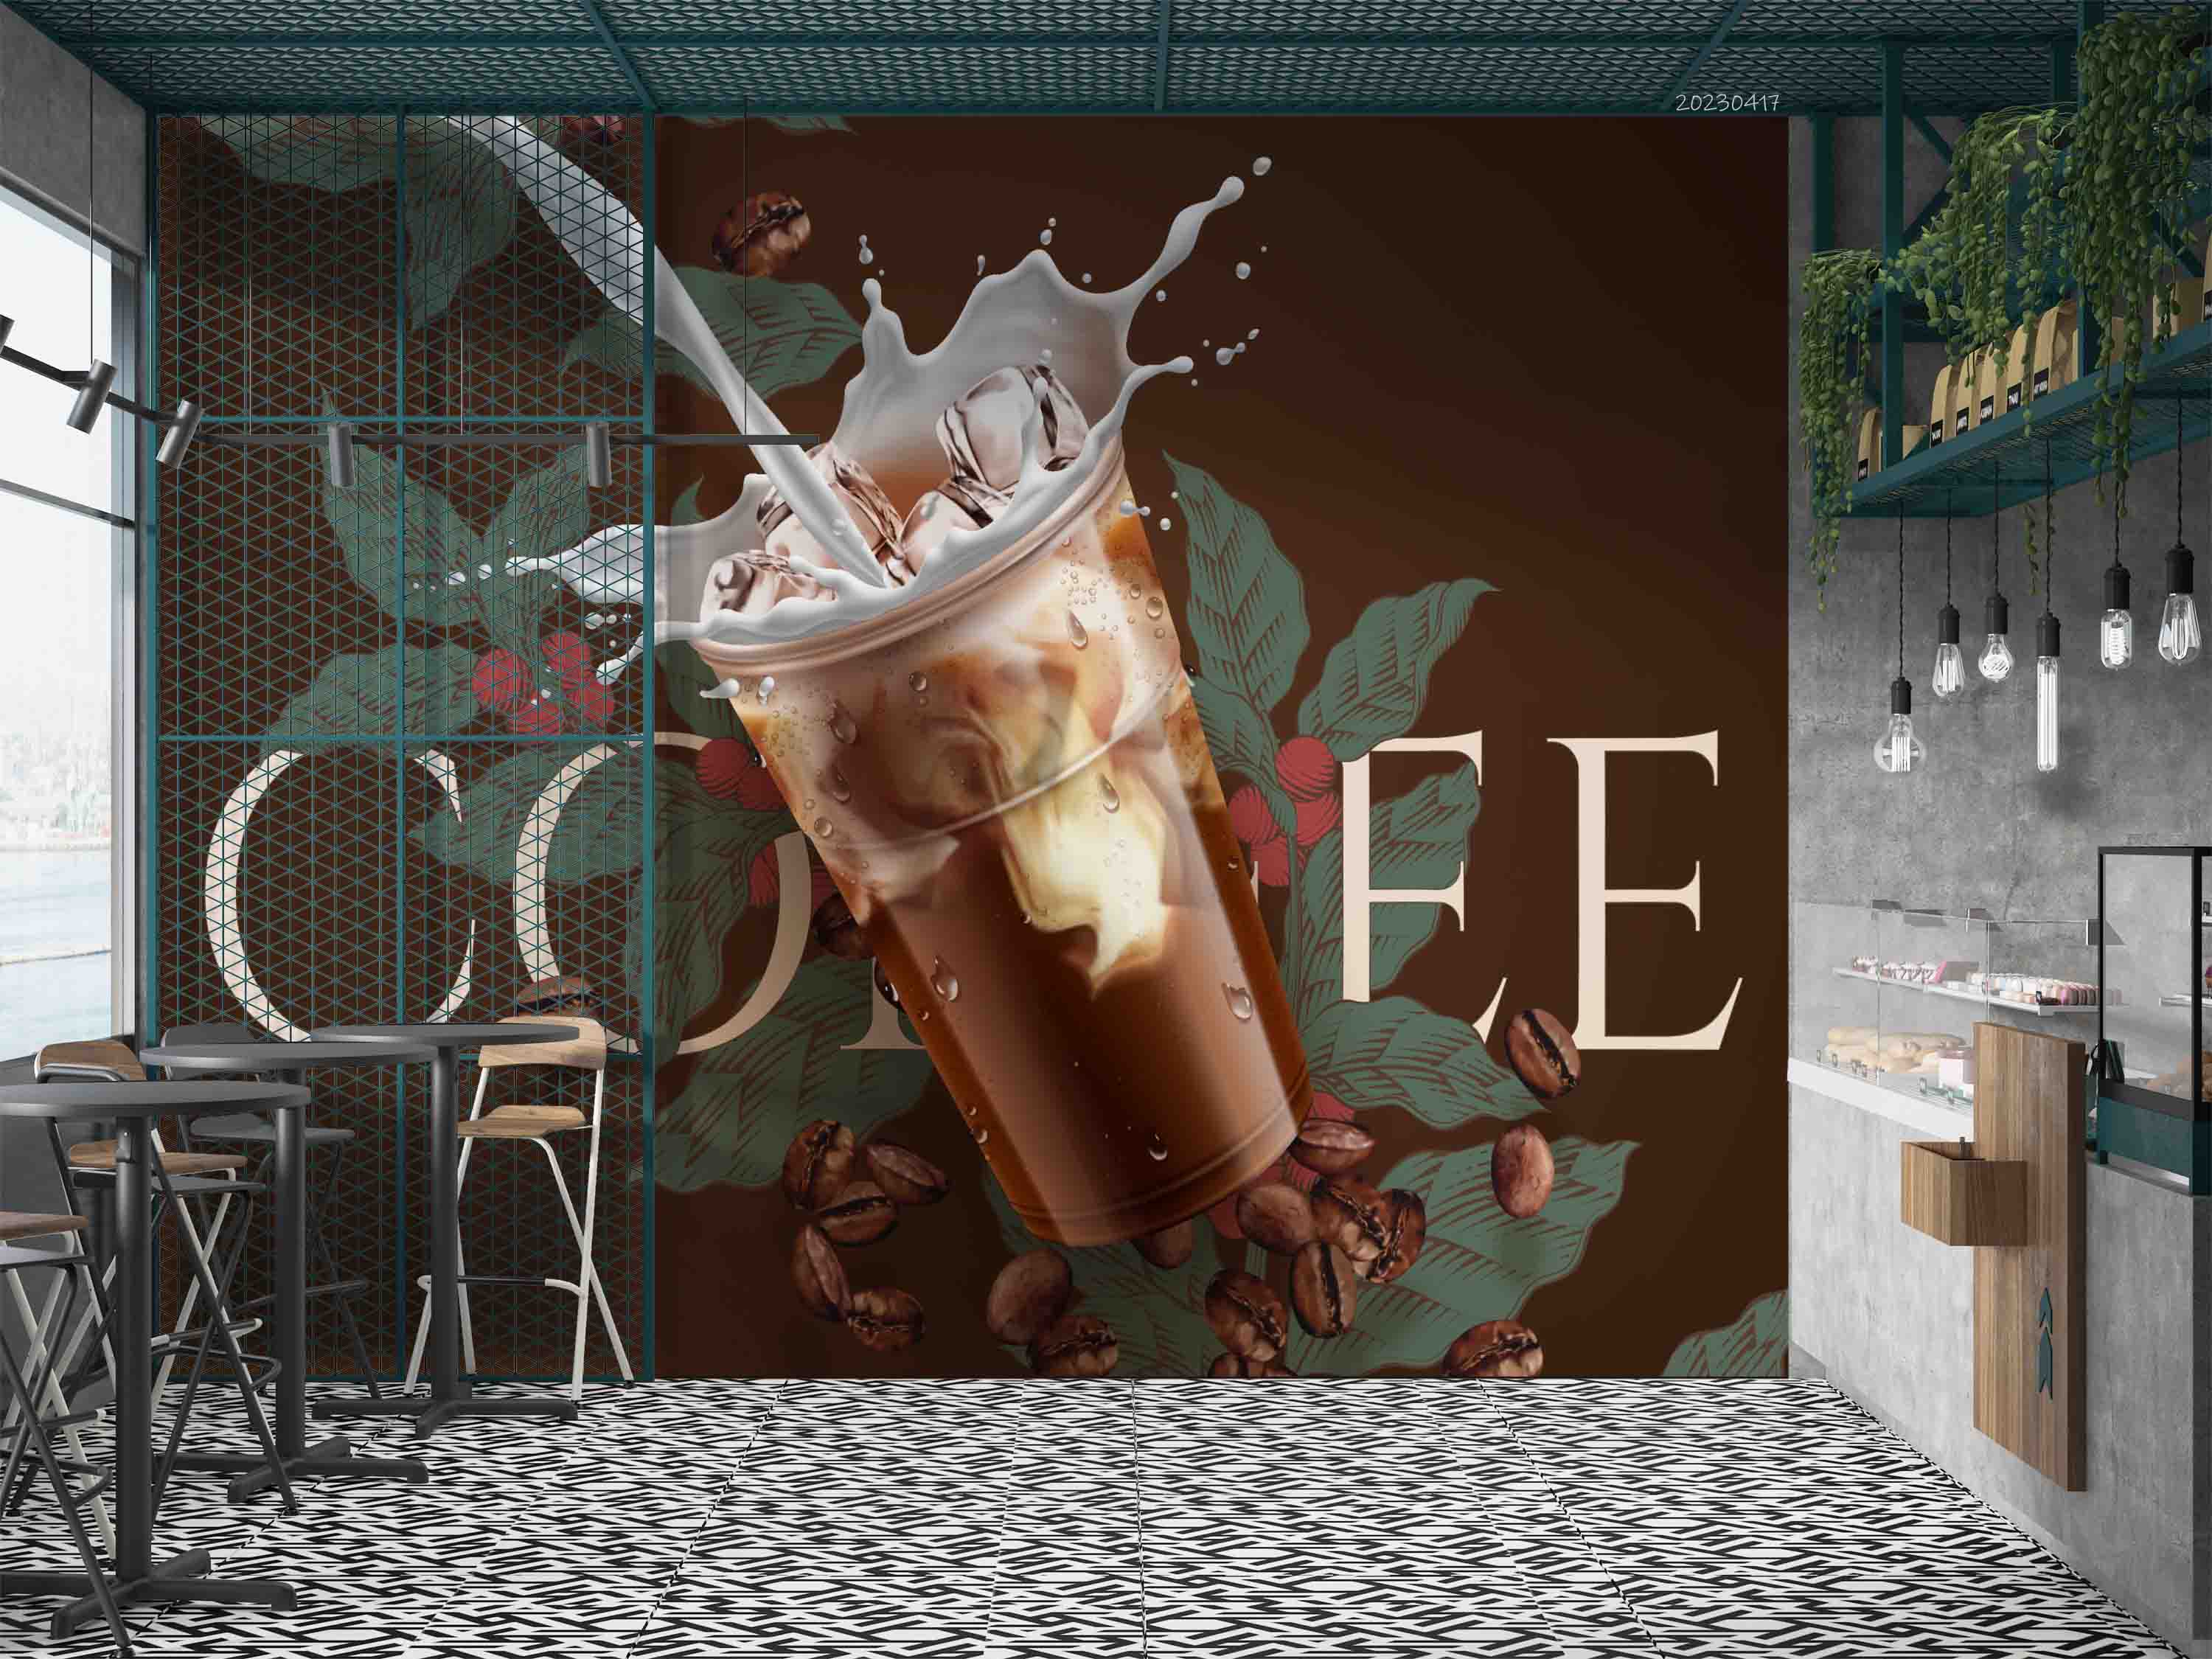 3D Vintage Style Cold Brew Coffee Brown Background Wall Mural Wallpaper GD 5516- Jess Art Decoration